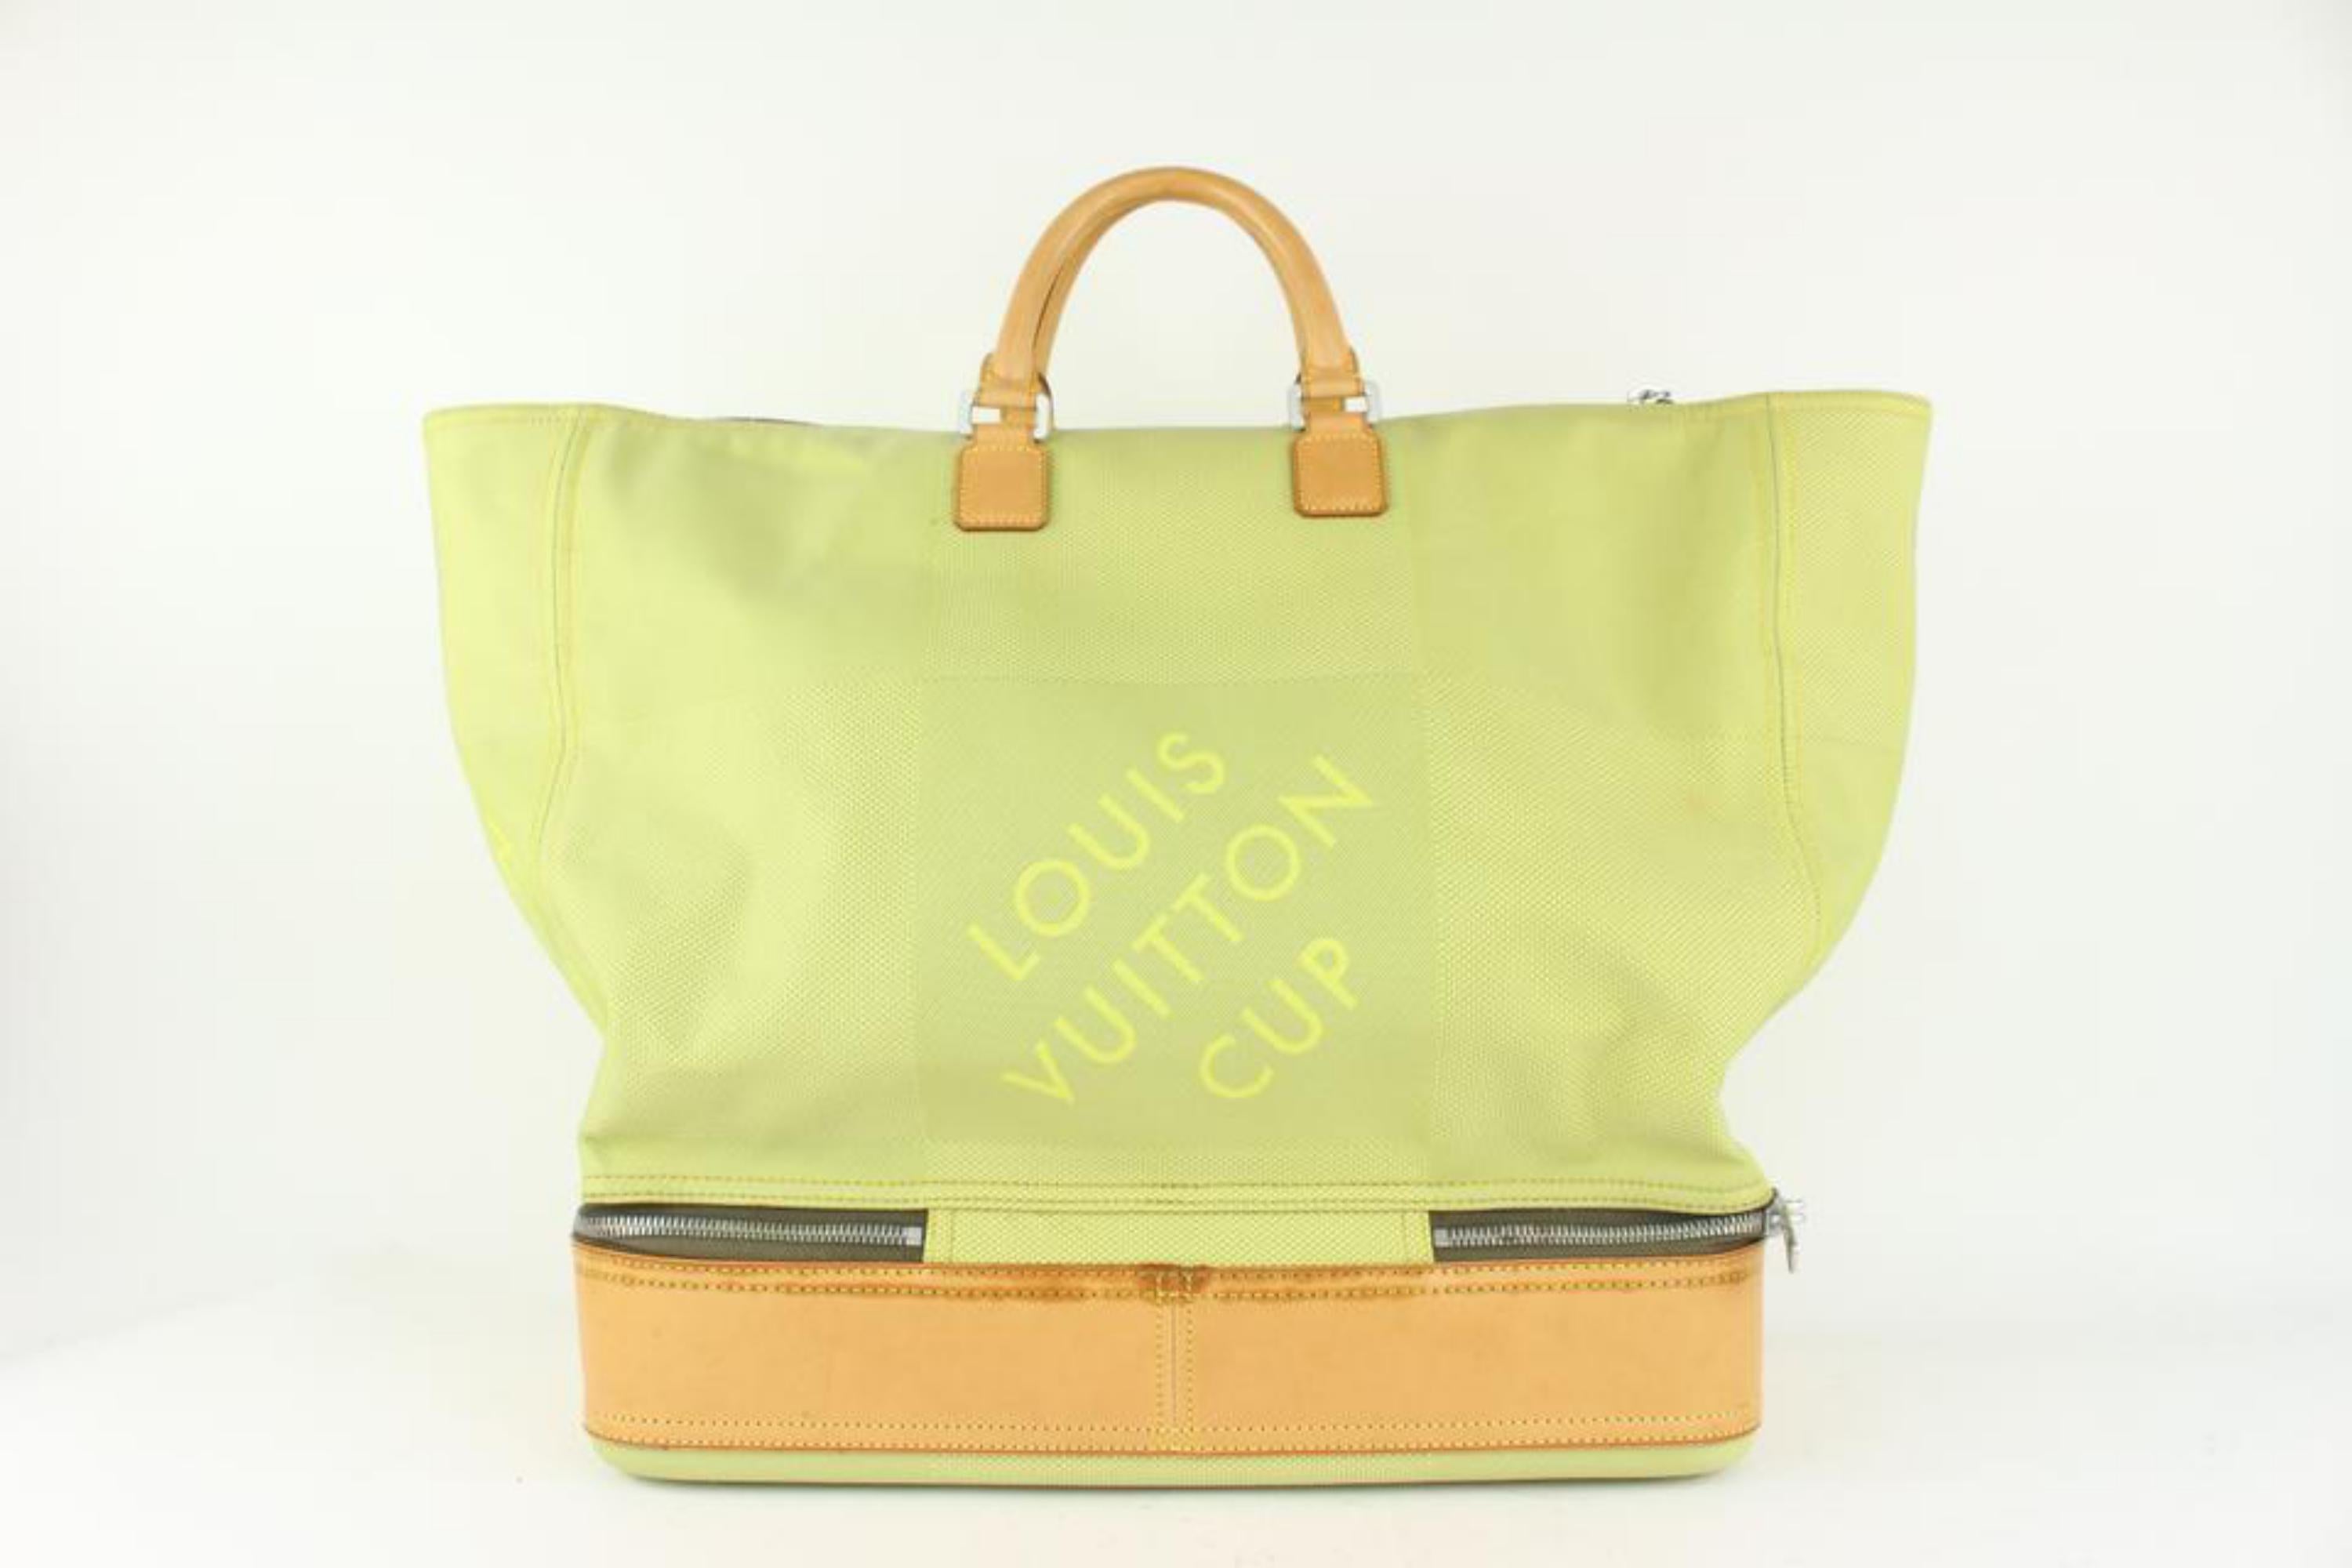 Louis Vuitton Lime Green Damier Geant Southern Cross Sac Sport 1018lv8 In Good Condition For Sale In Dix hills, NY